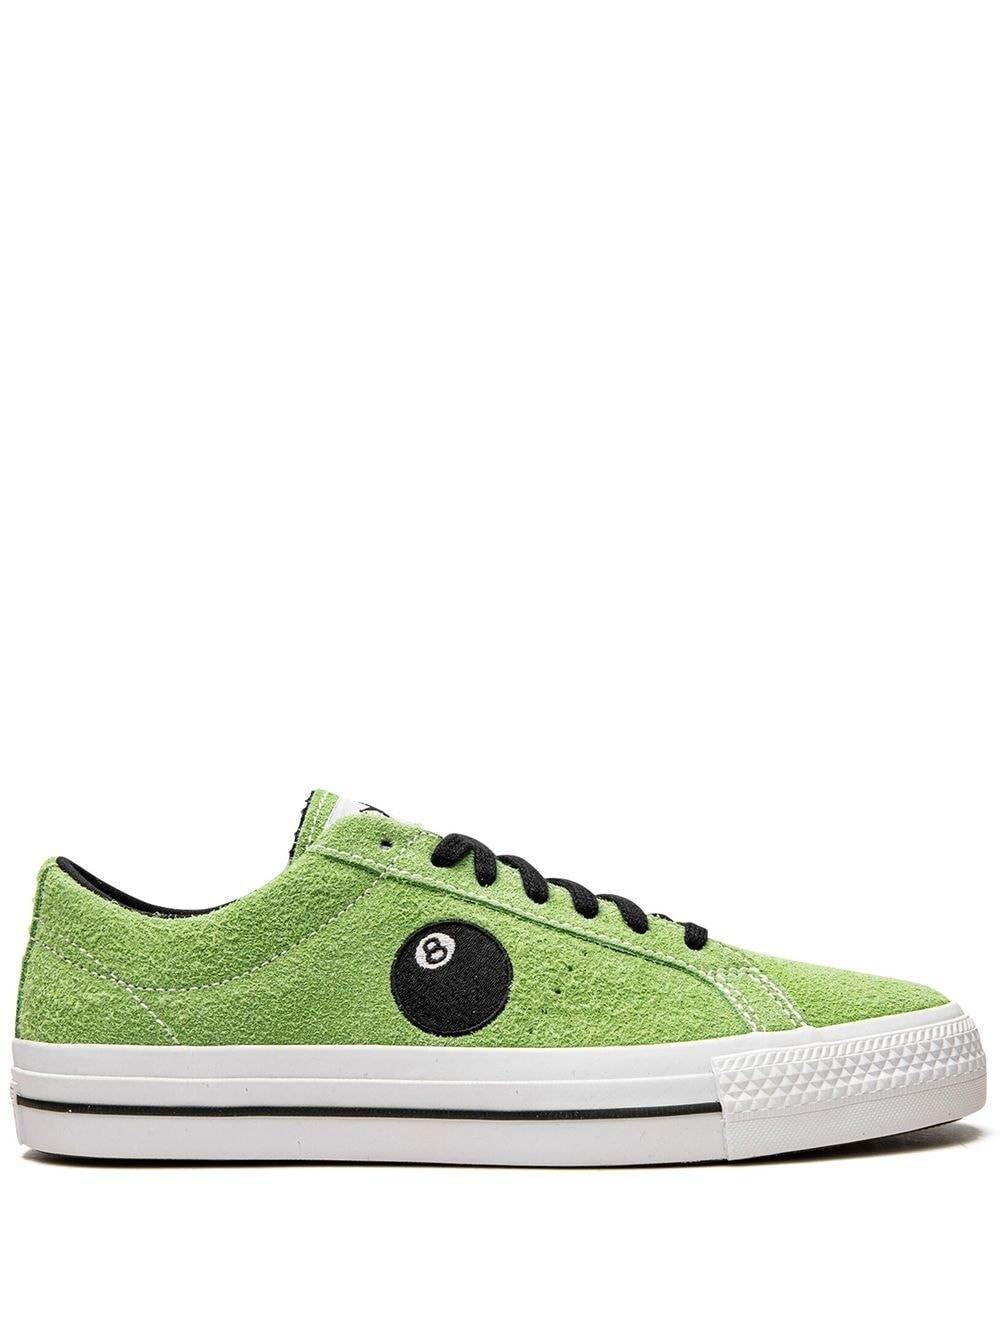 Converse X Stüssy One Star Pro "8-ball" Trainers In Green